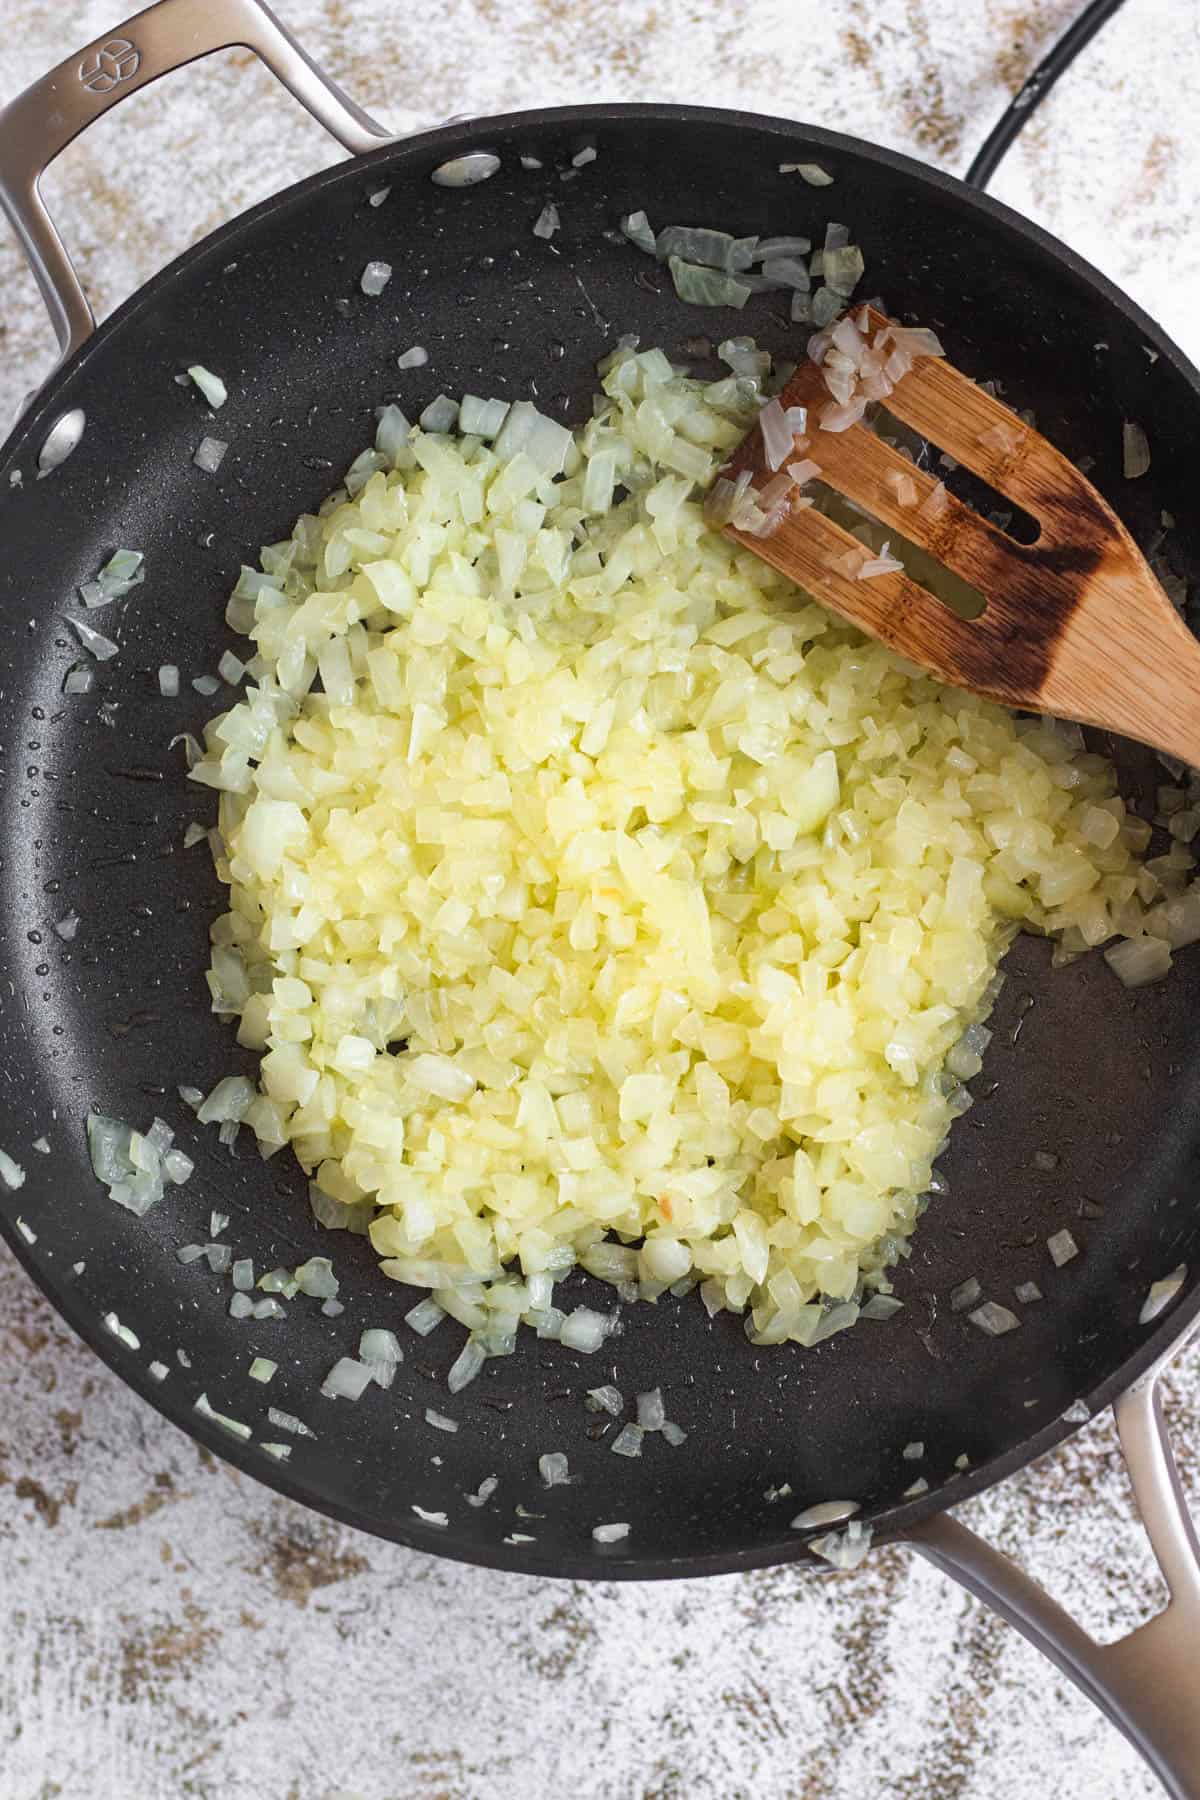 Sauteed onions in a pan with a wooden utensil